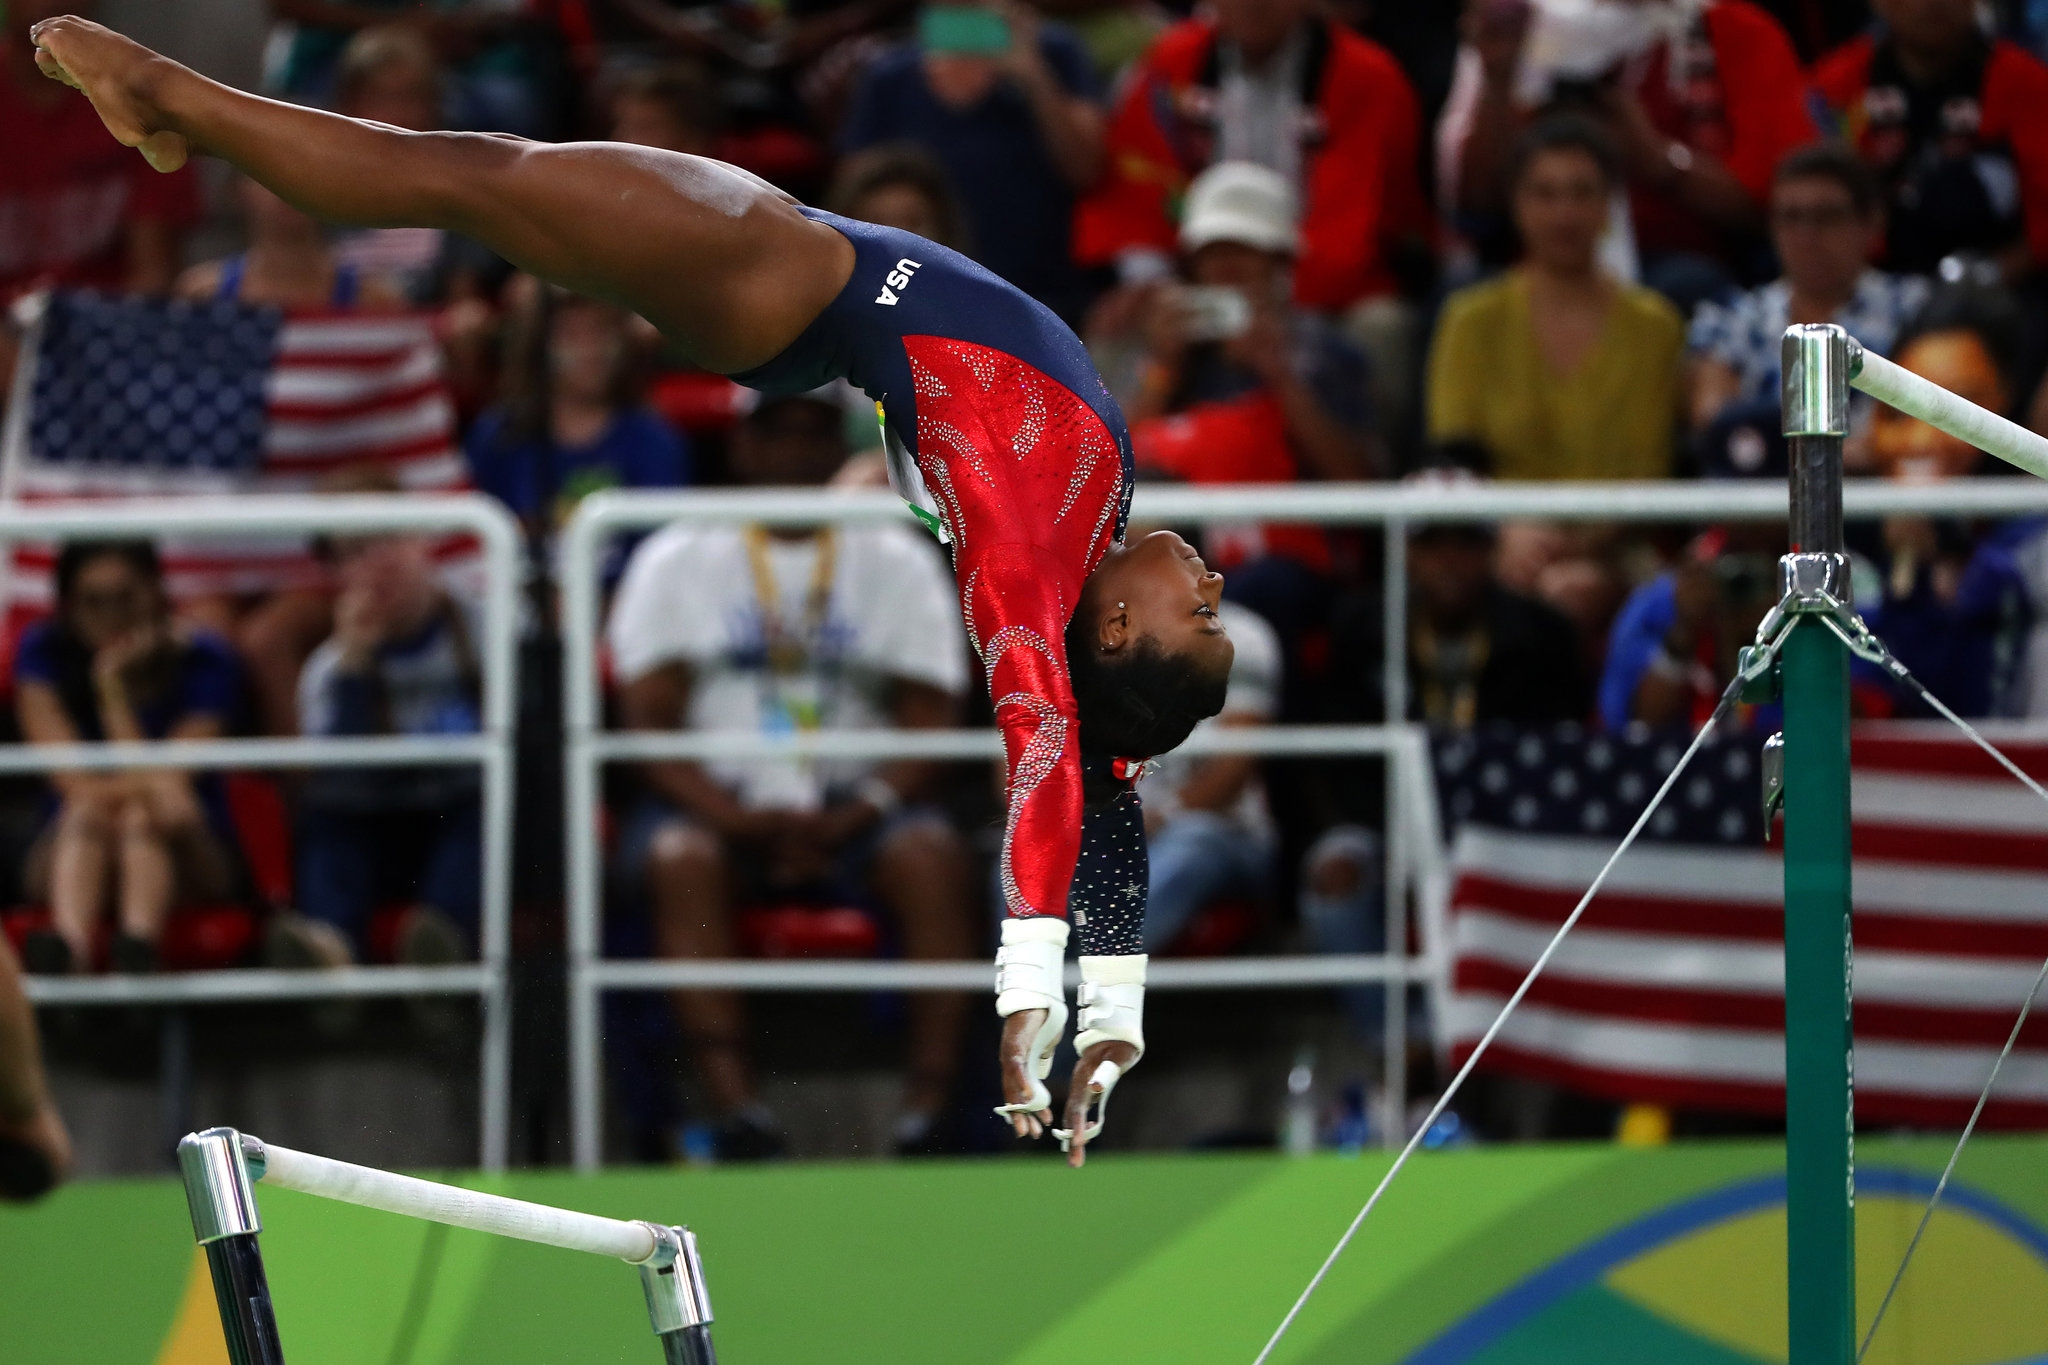 a female gymnast performs on the uneven bars